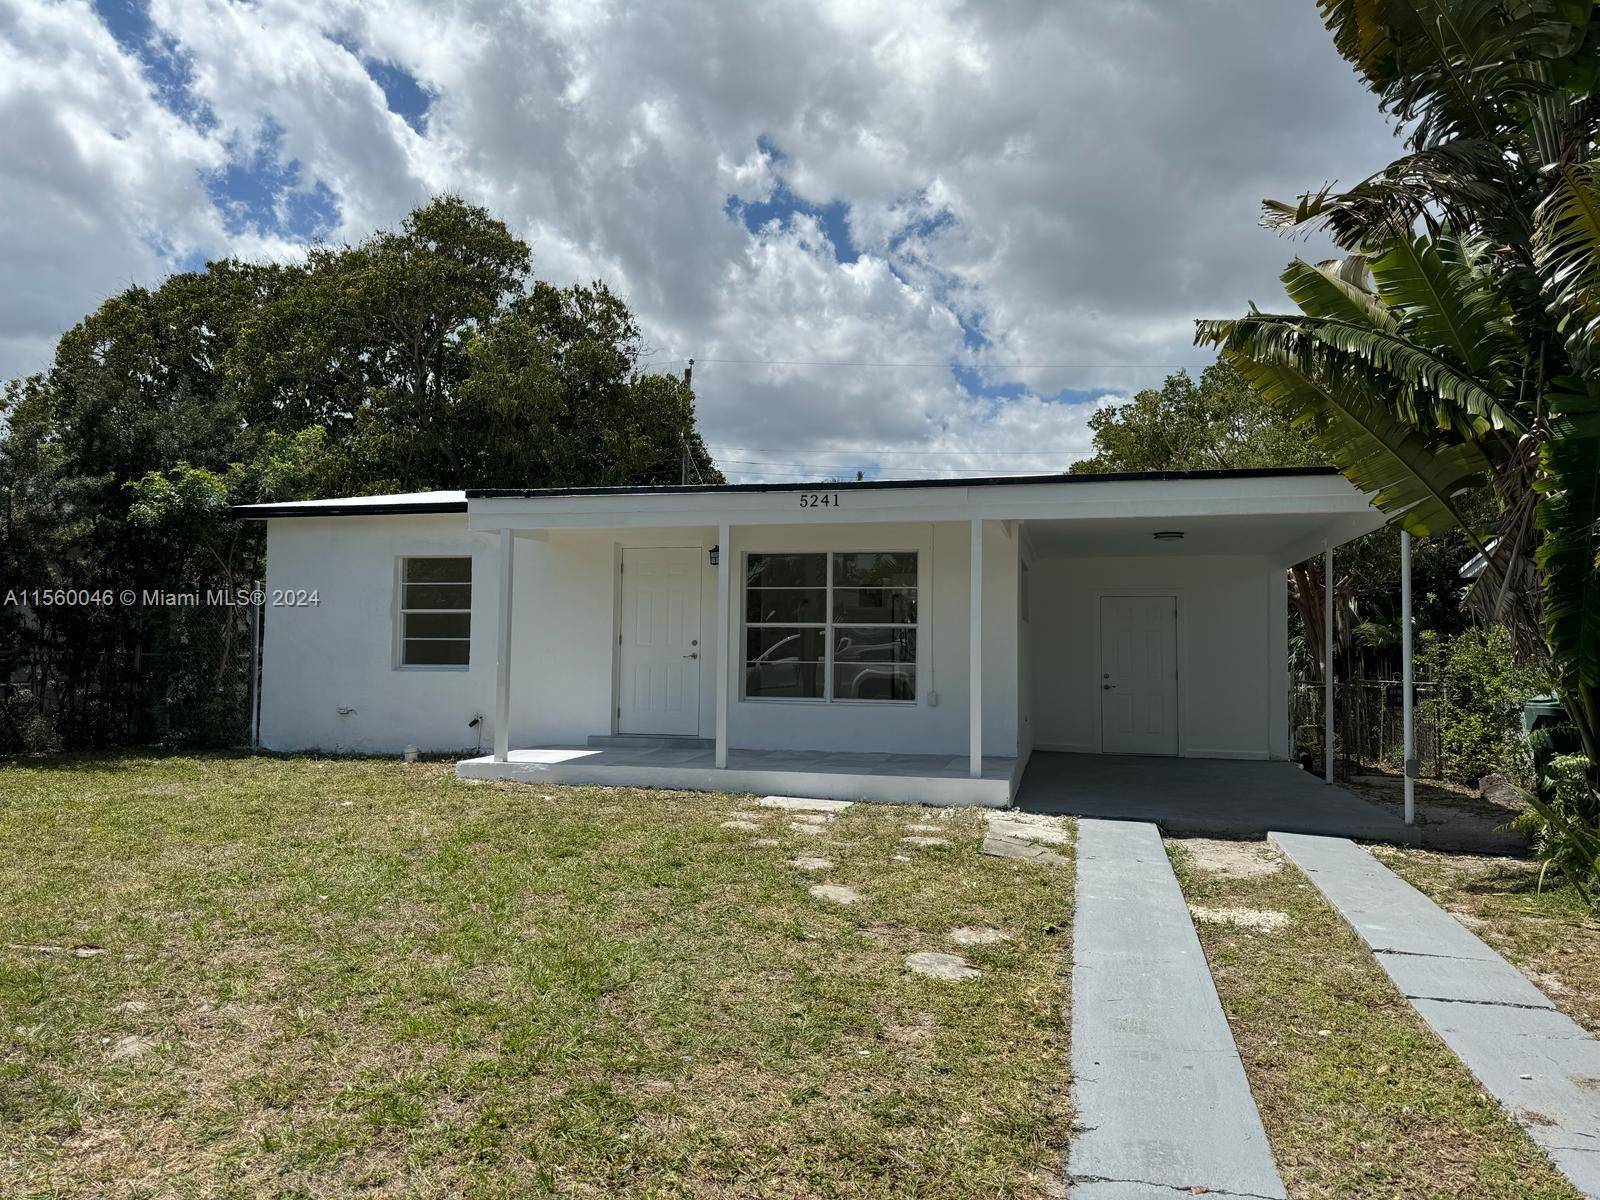 Centrally located remodeled 2 1 home with nice yard space.